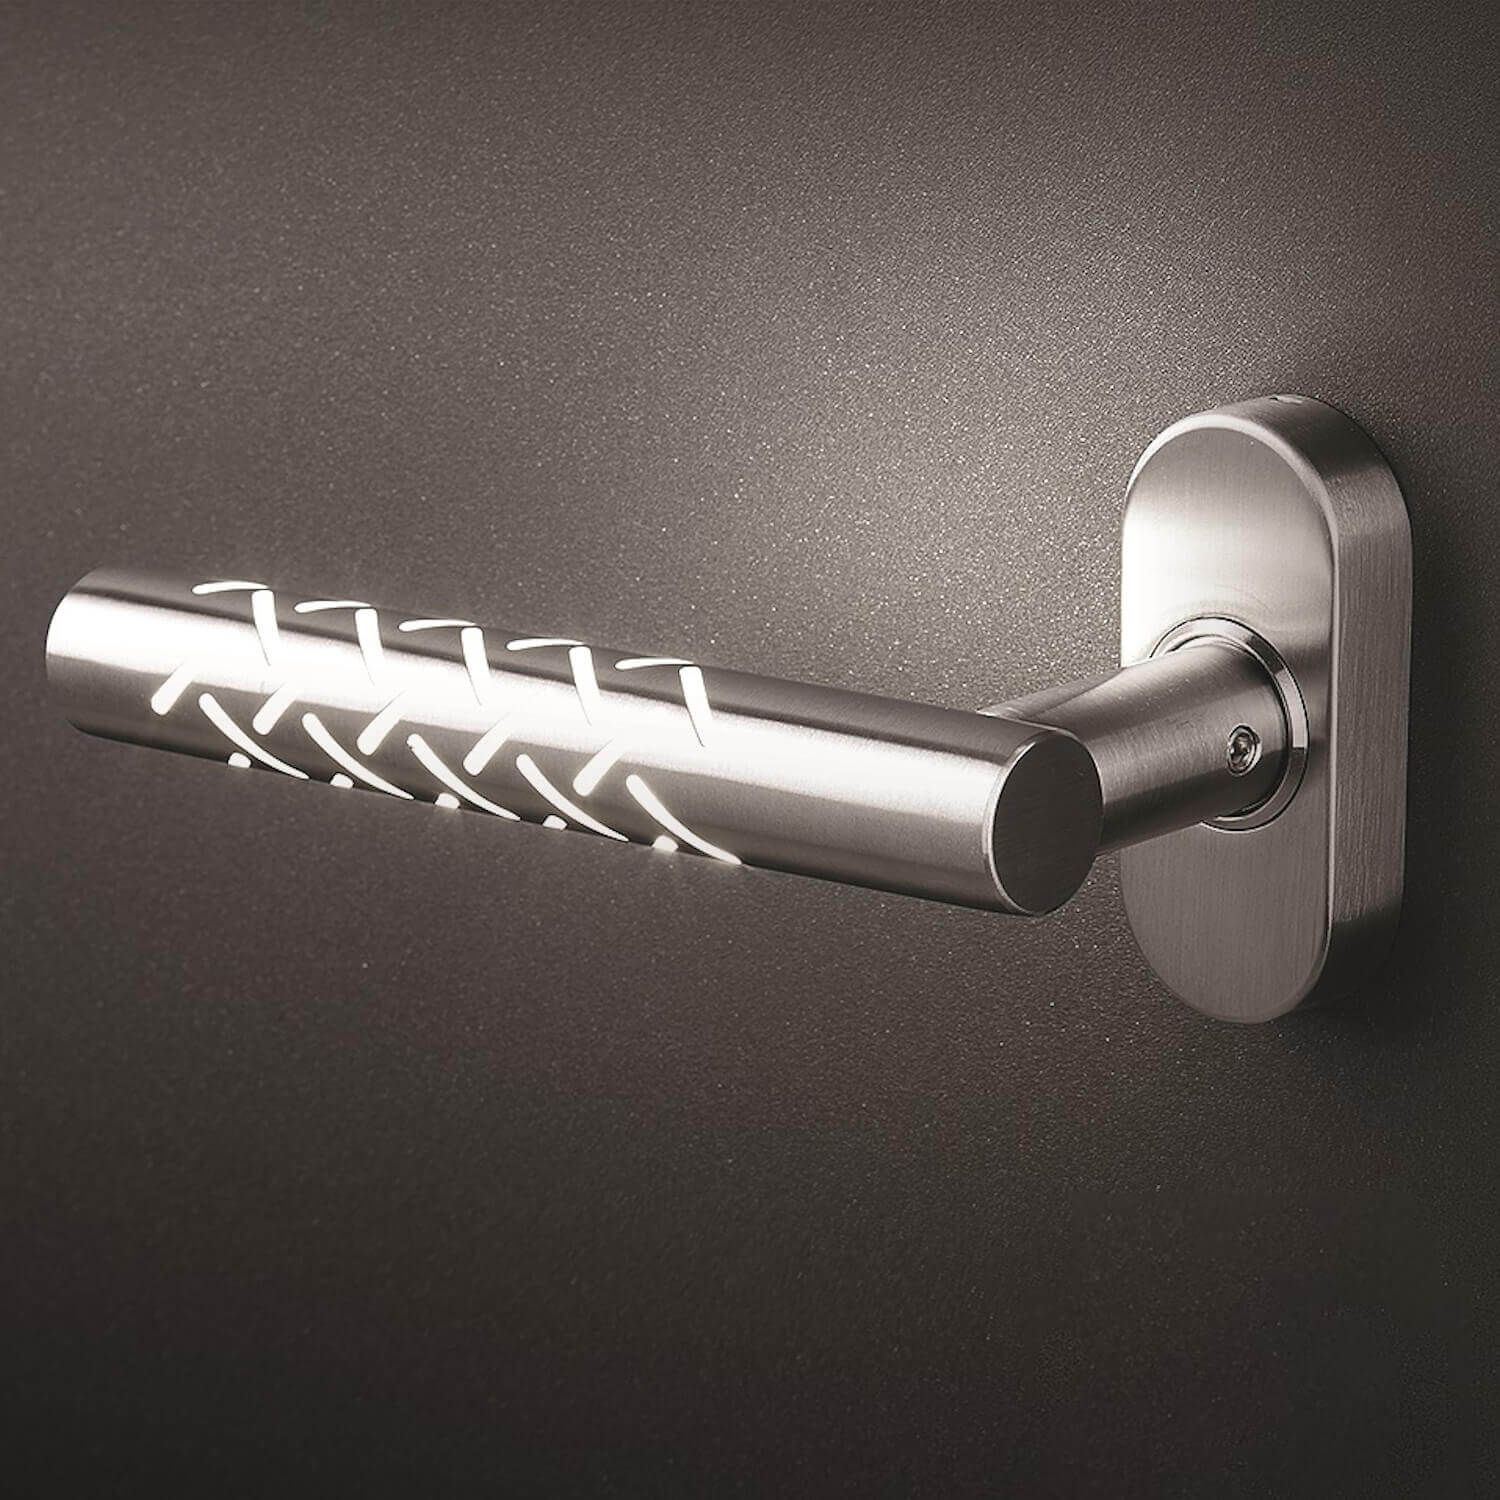 Round inside handle made of stainless steel with illuminated finish